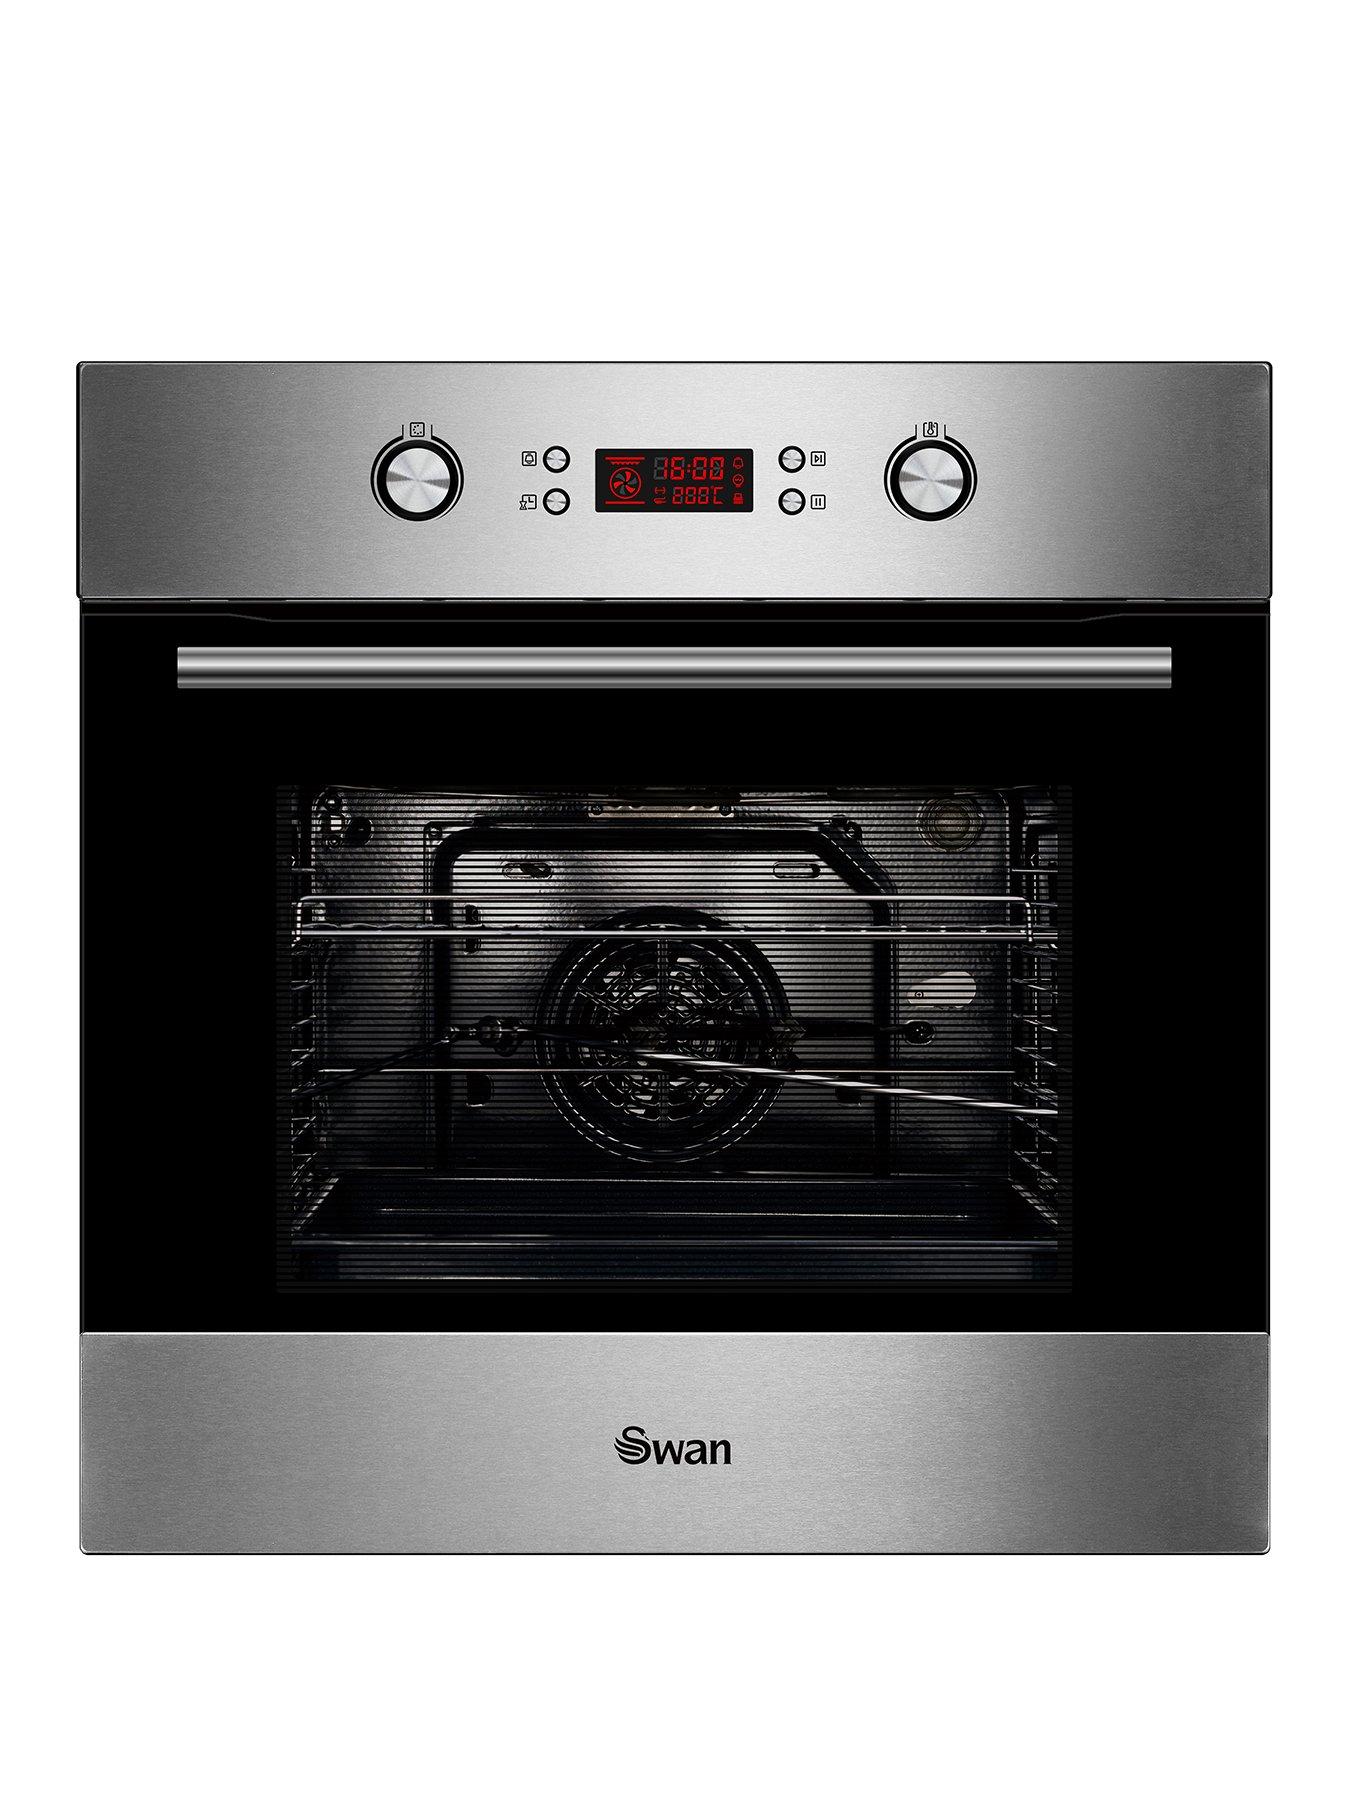 Swan Sxb7070Ss 60Cm Built-In Single Electric Pyrolytic Oven – Stainless Steel